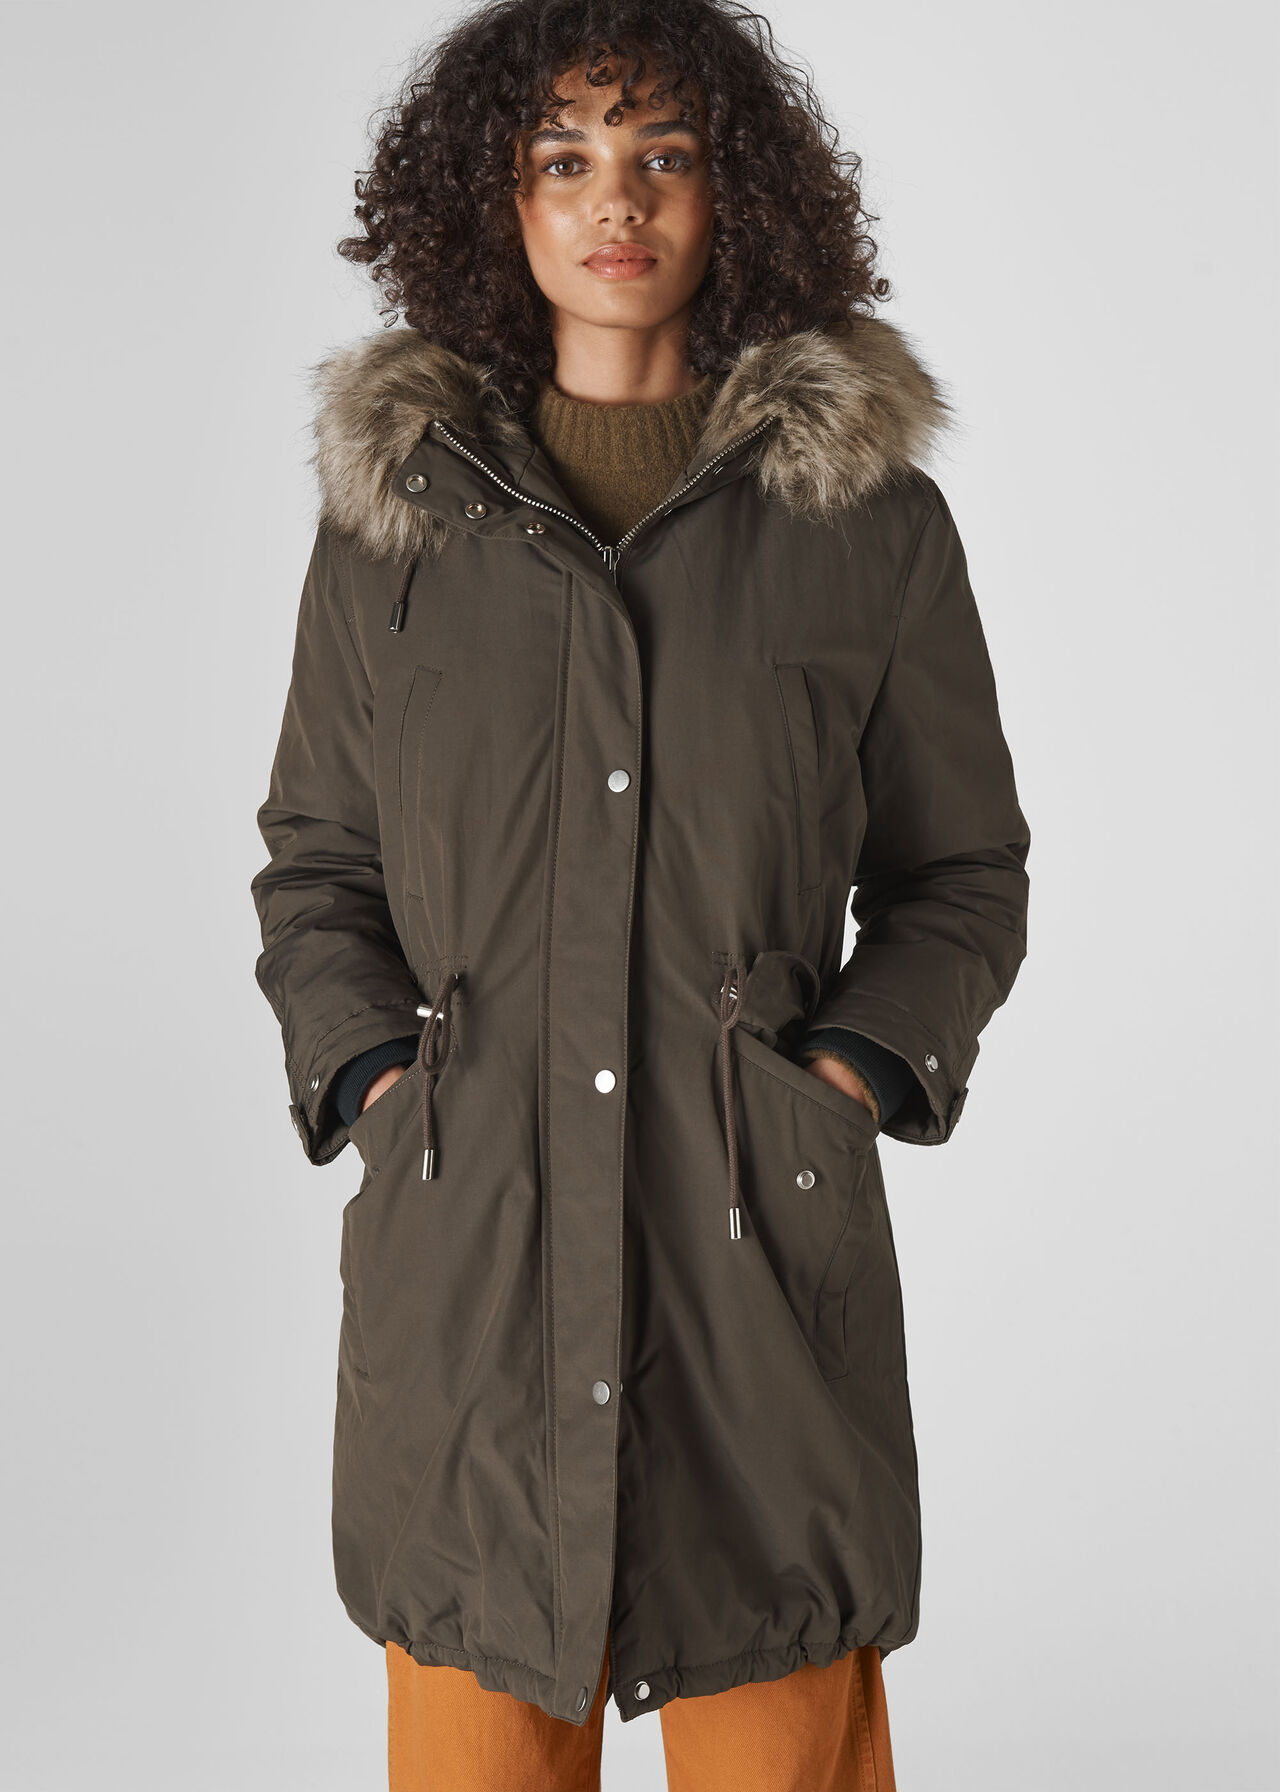 Grey Cleo Casual Parka | WHISTLES | Whistles